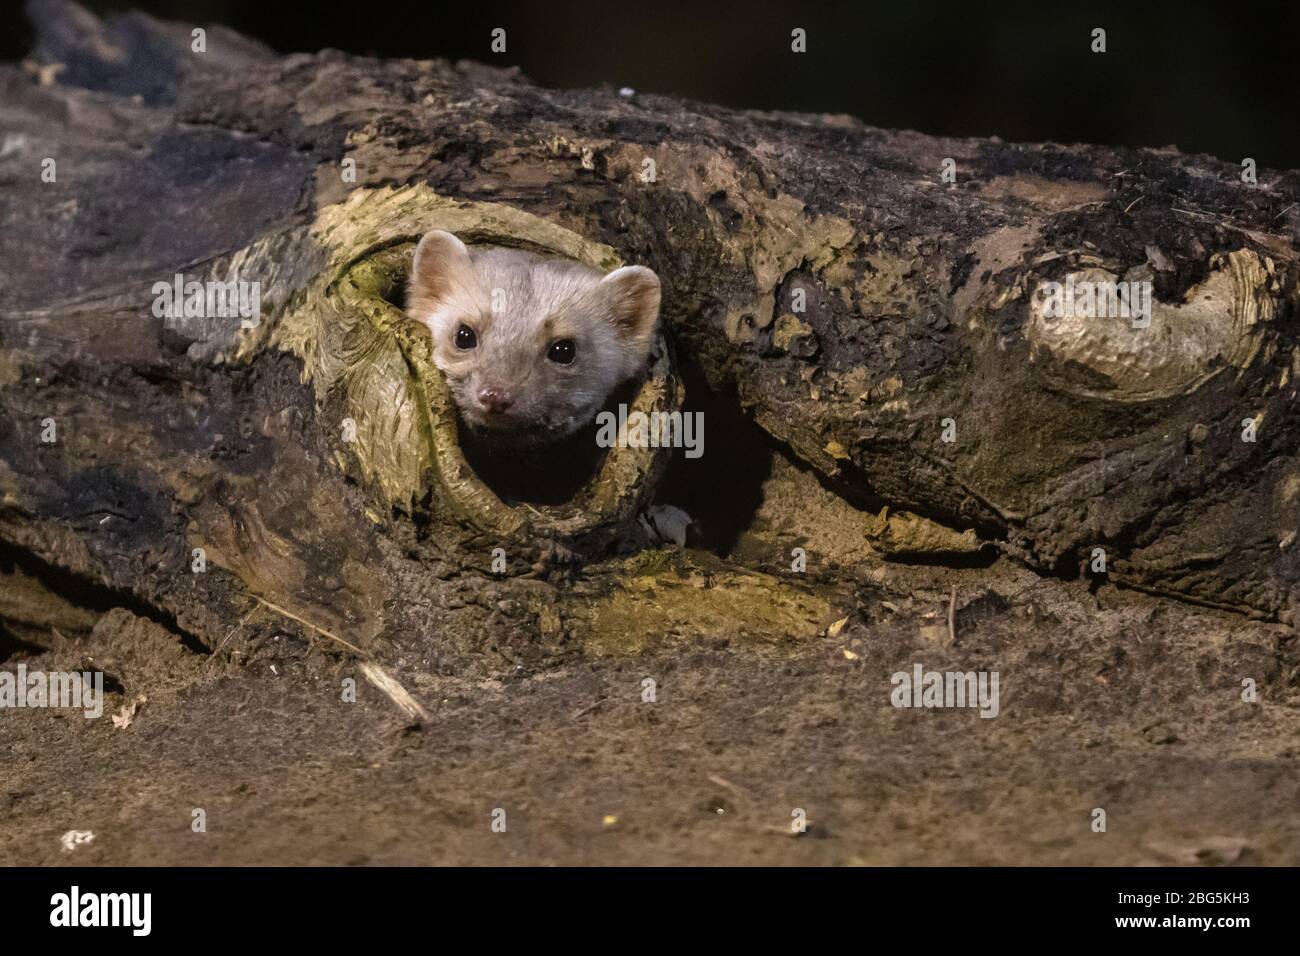 Stone marten (Martes foina) looking from burrow In natural habitat in darkness at night. Netherlands Stock Photo